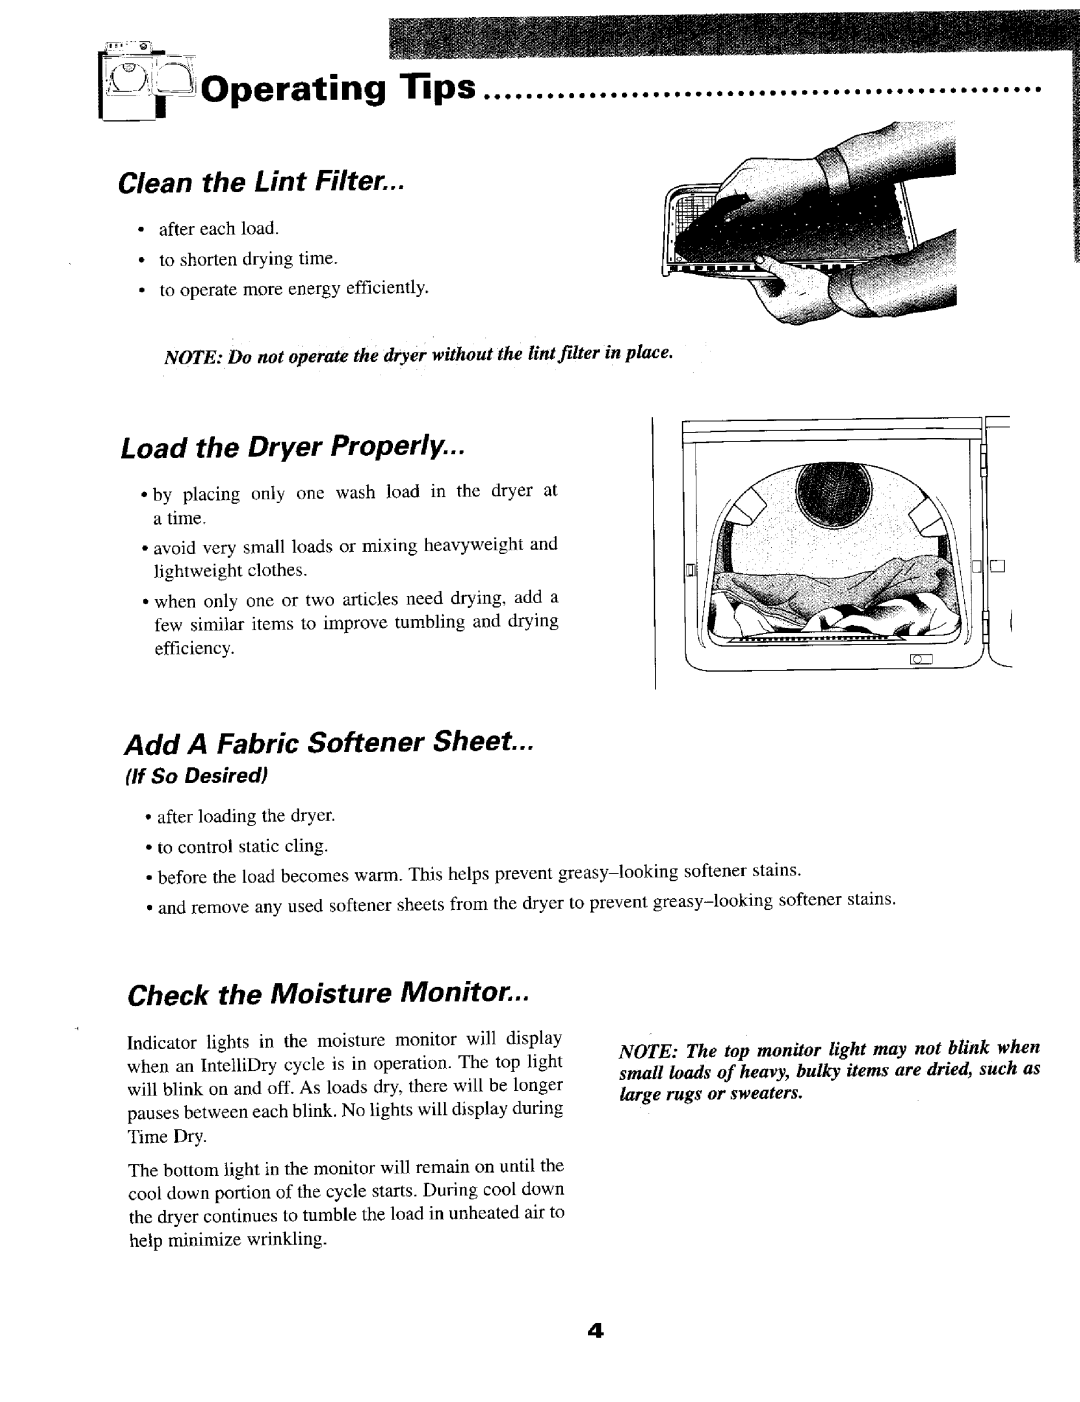 Maytag MD9606 Clean the Lint Filter, Load the Dryer Properly, Add A Fabric Softener Sheet, Check the Moisture Monitor 